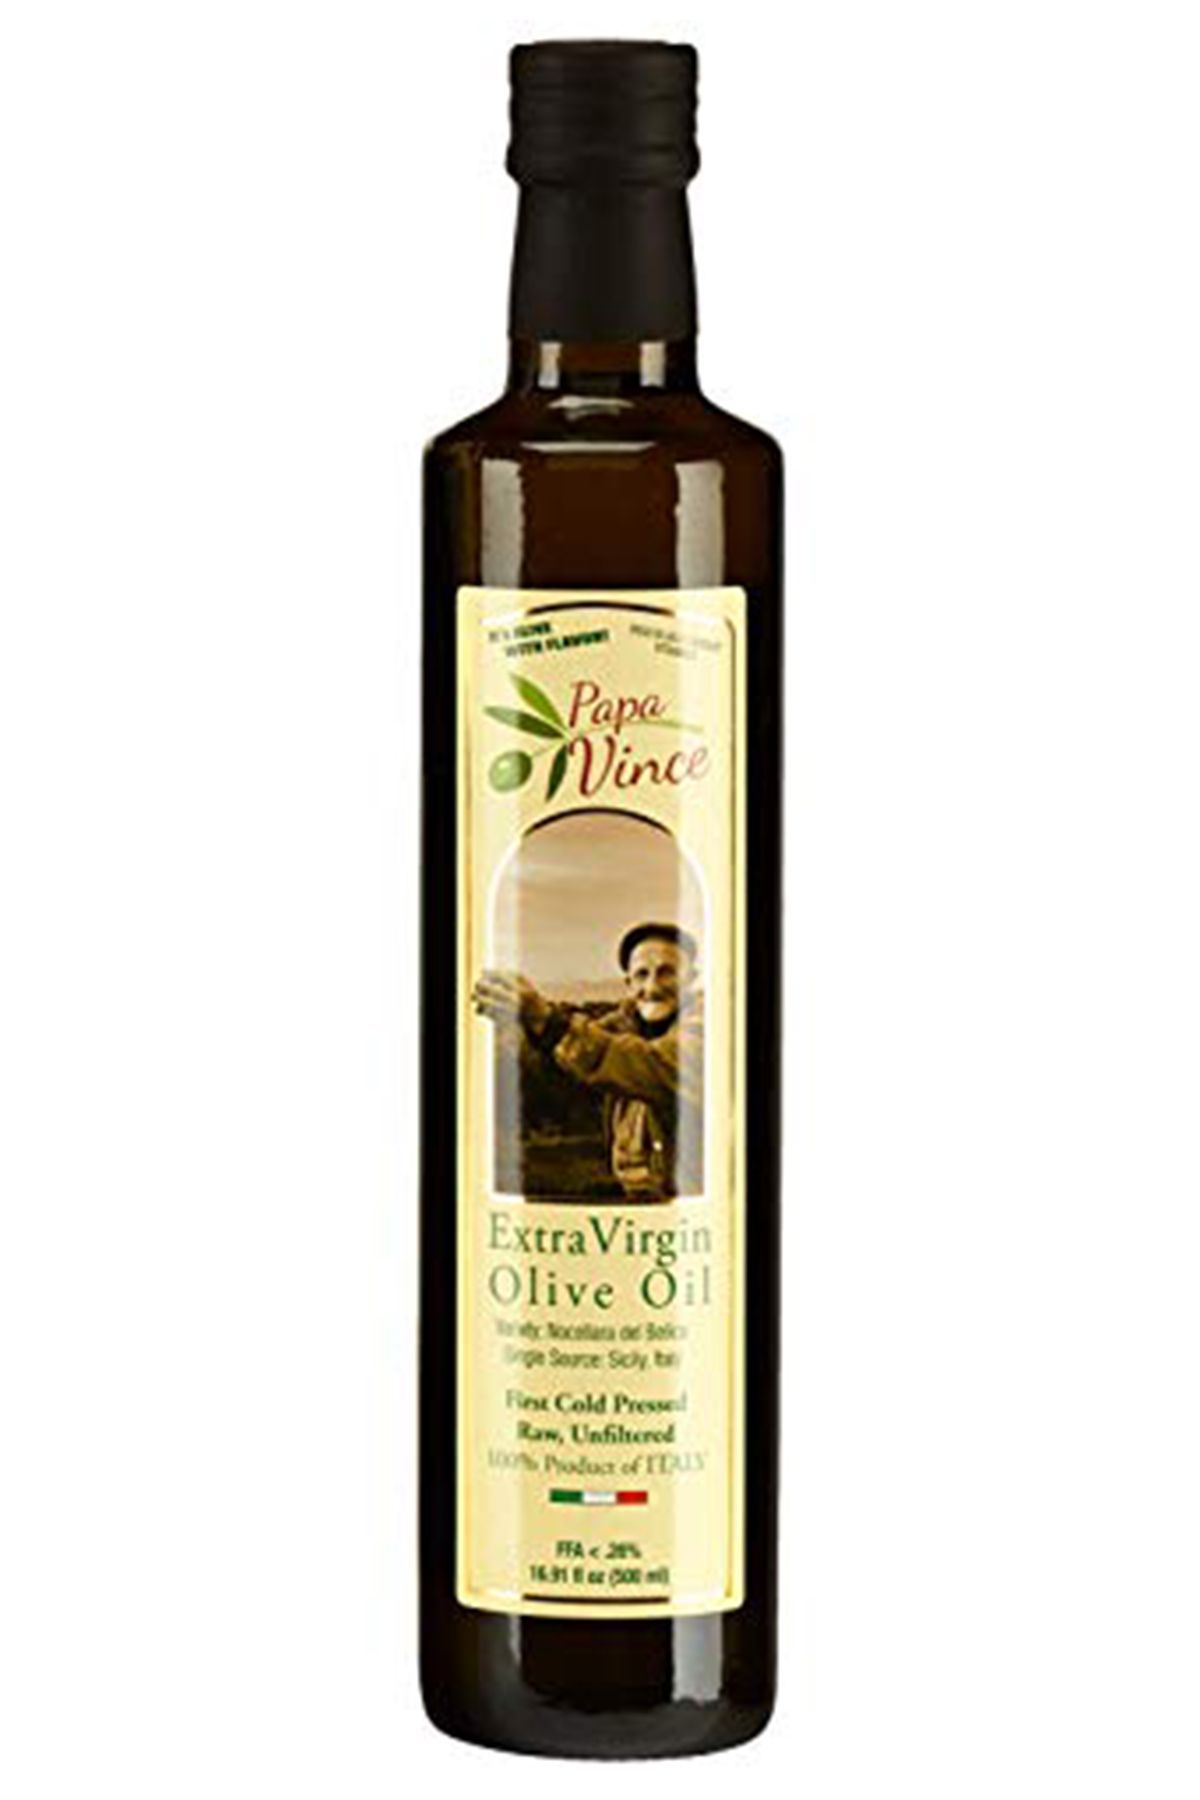 Papa Vince Extra Virgin Olive Oil 